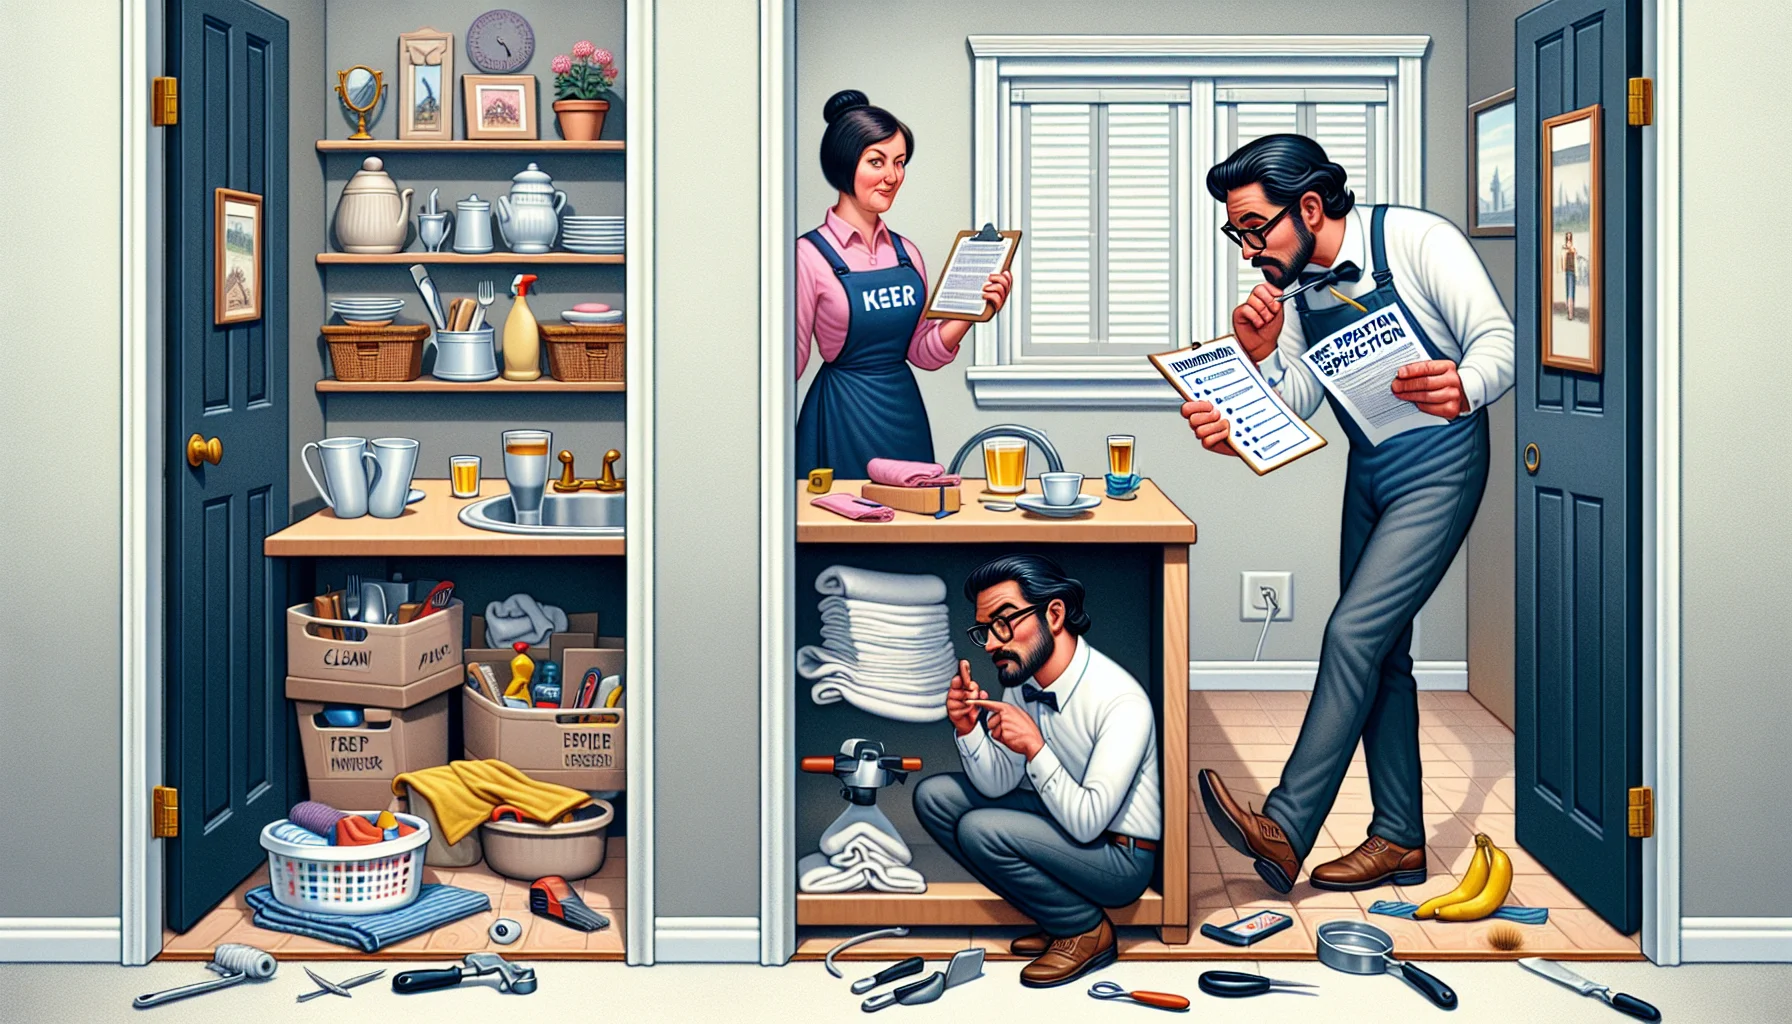 Create a humorous and realistic scene illustrating the ideal preparation for a home inspection from a real estate perspective. This scene should include a meticulous homeowner, who appears to be of South Asian descent, going about his duties meticulously; his tasks may include cleaning, making minor repairs and arranging belongings neatly. In another corner, there could be a home inspector, who is a Caucasian woman, with a checklist in hand, casting appreciative glances at the house. Various humorous elements such as the homeowner dusting a perfectly clean surface or meticulously aligning all the cutlery in the drawer can be incorporated to add a touch of humor.